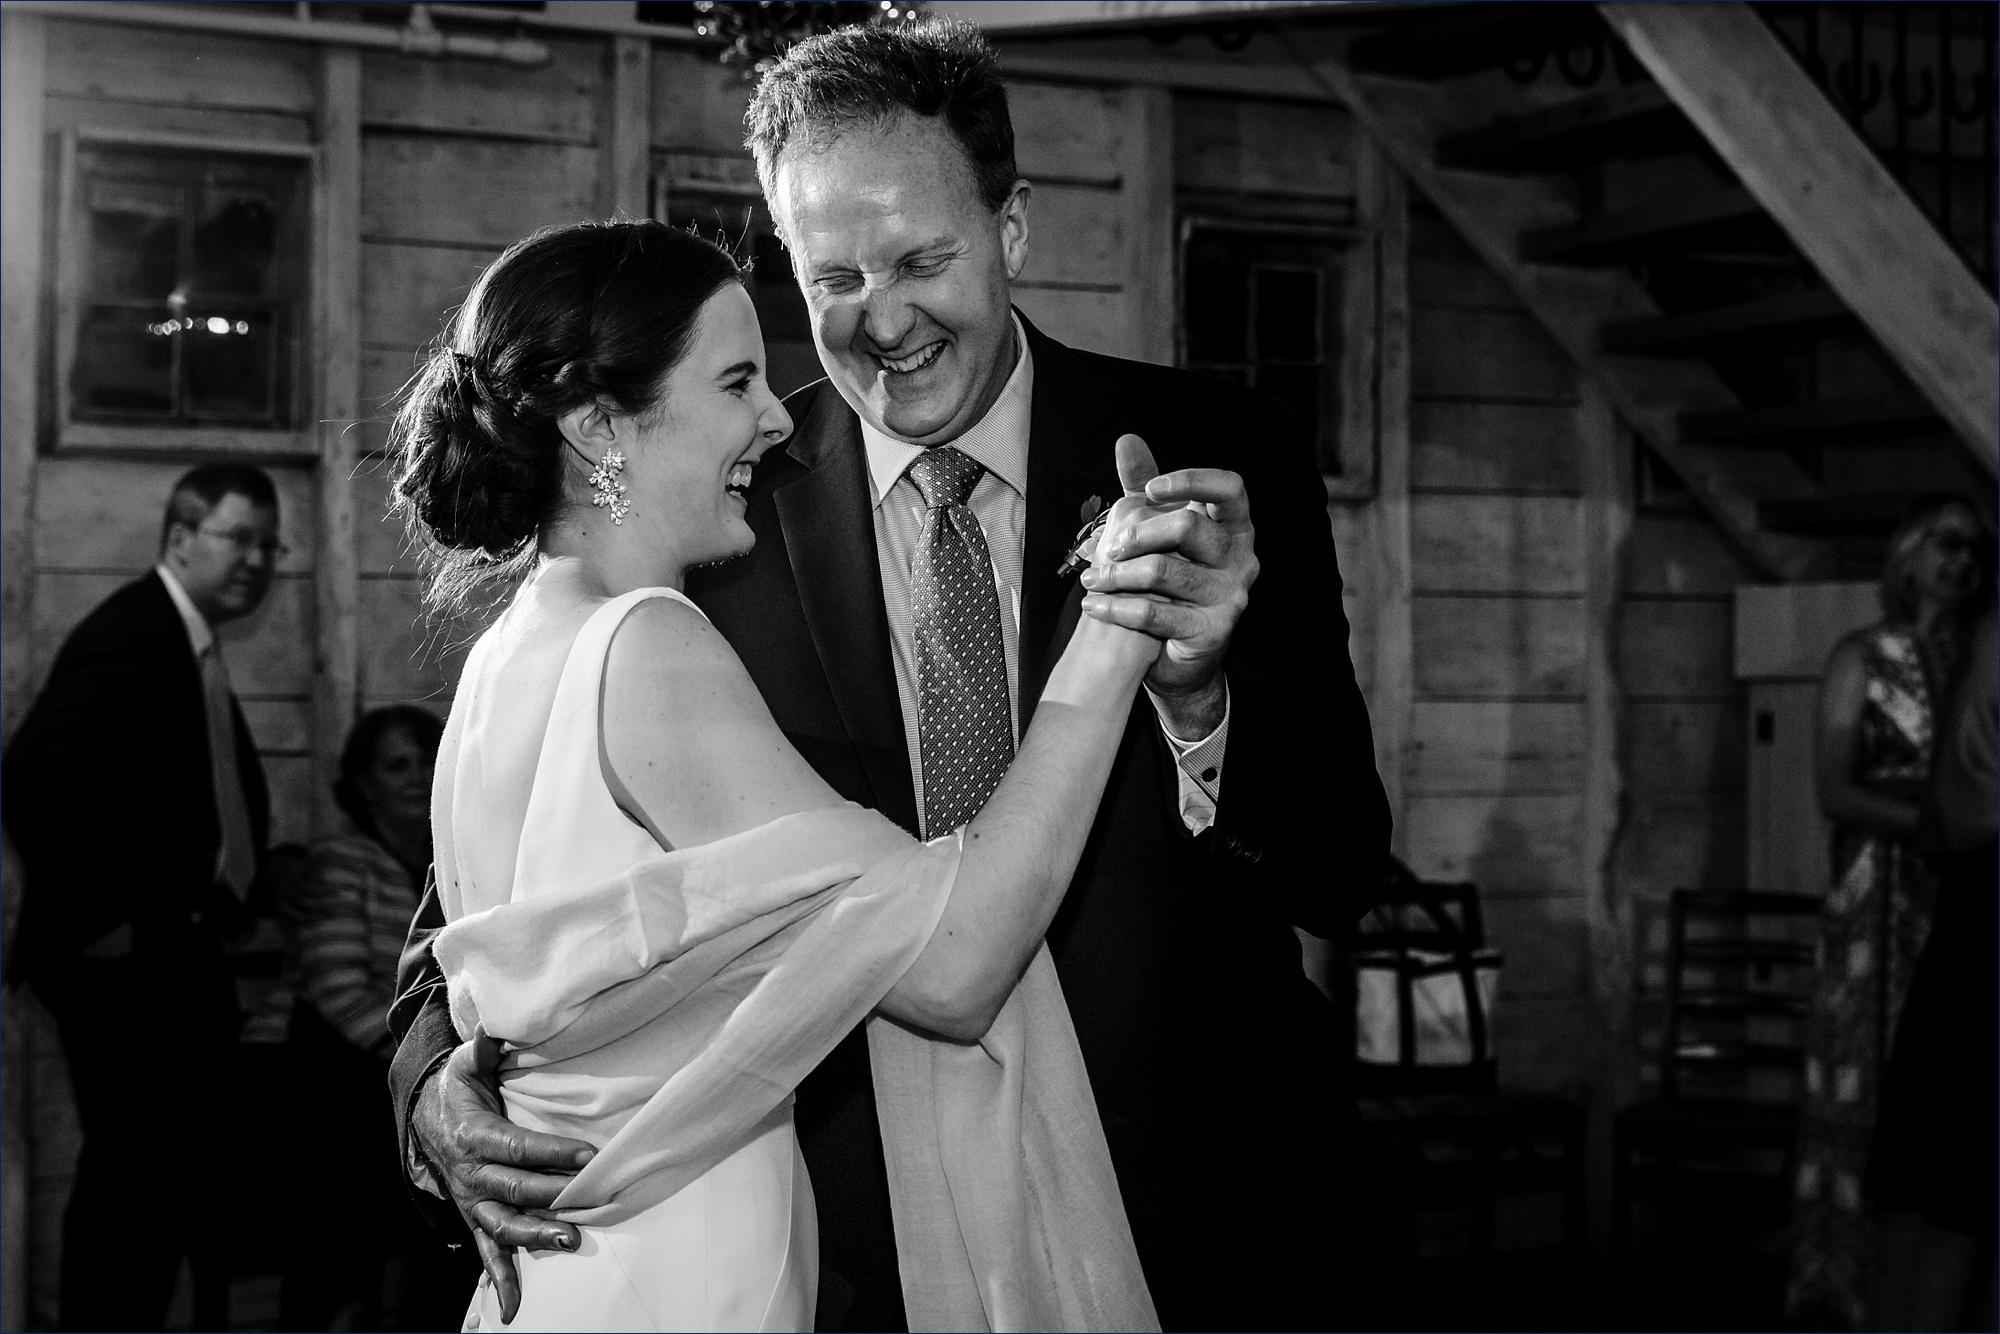 The bride and her father dance together in the barn at Hardy Farm and enjoy a laugh